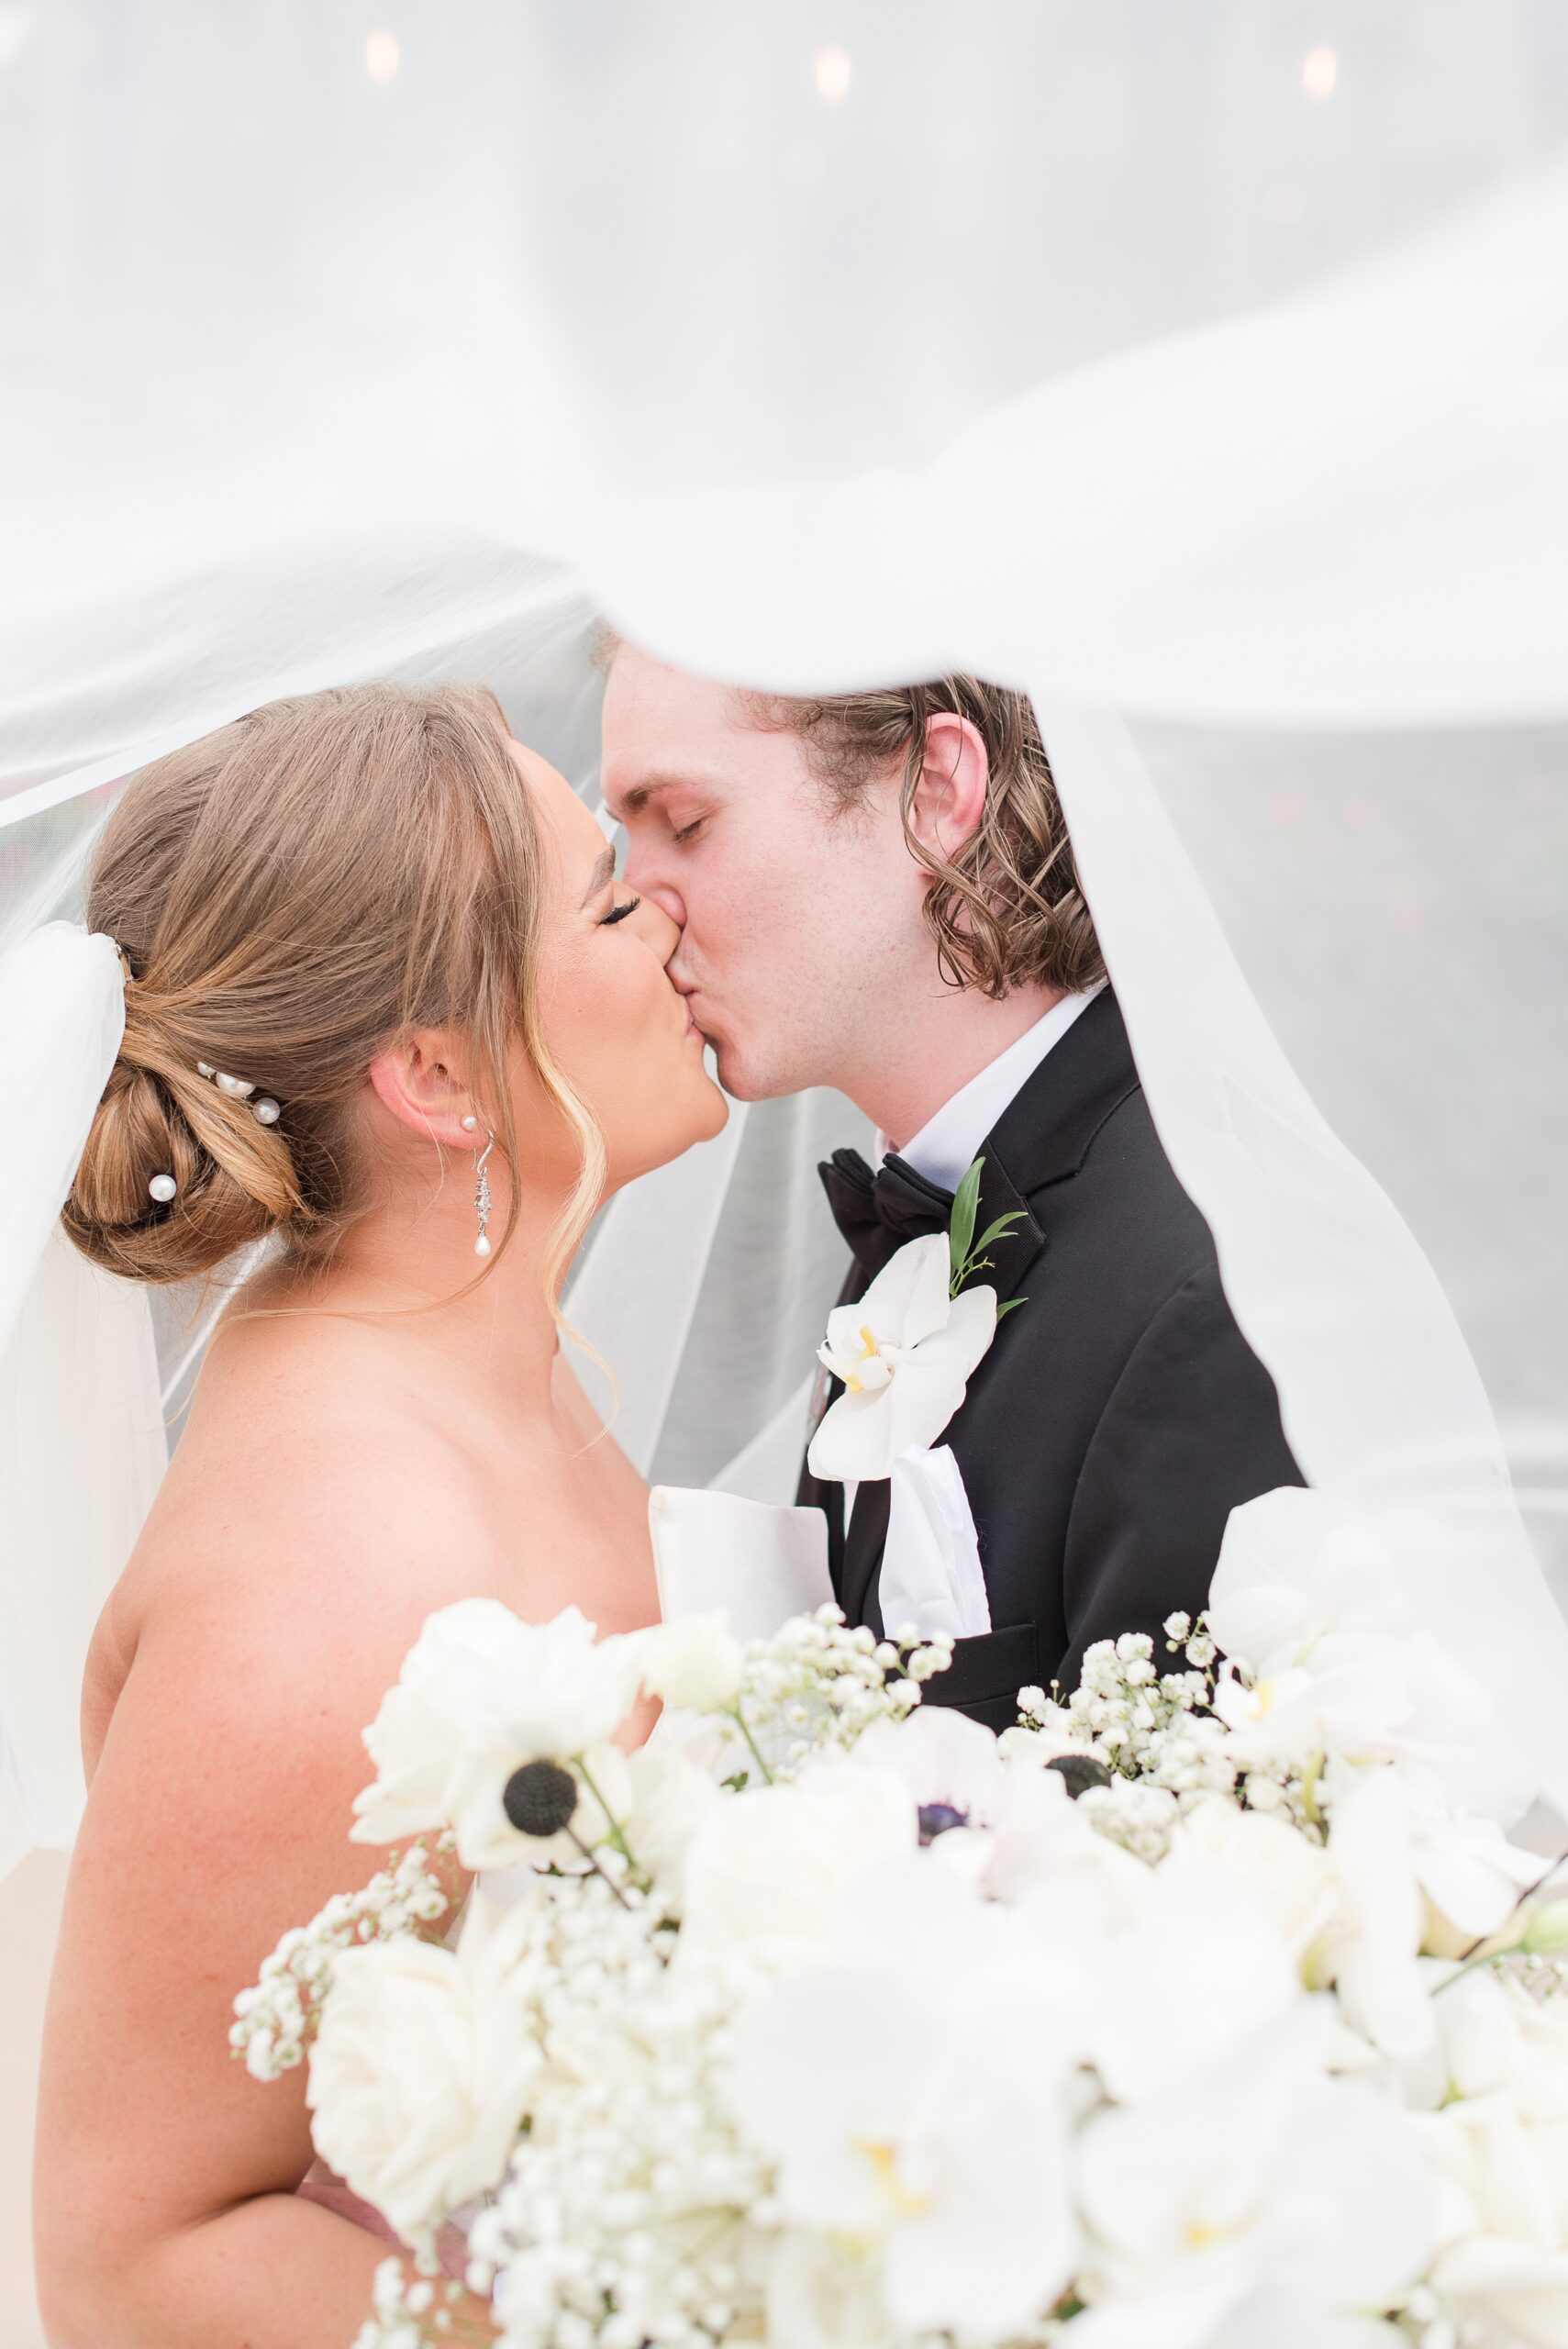 Newlyweds kiss while hiding under a large veil